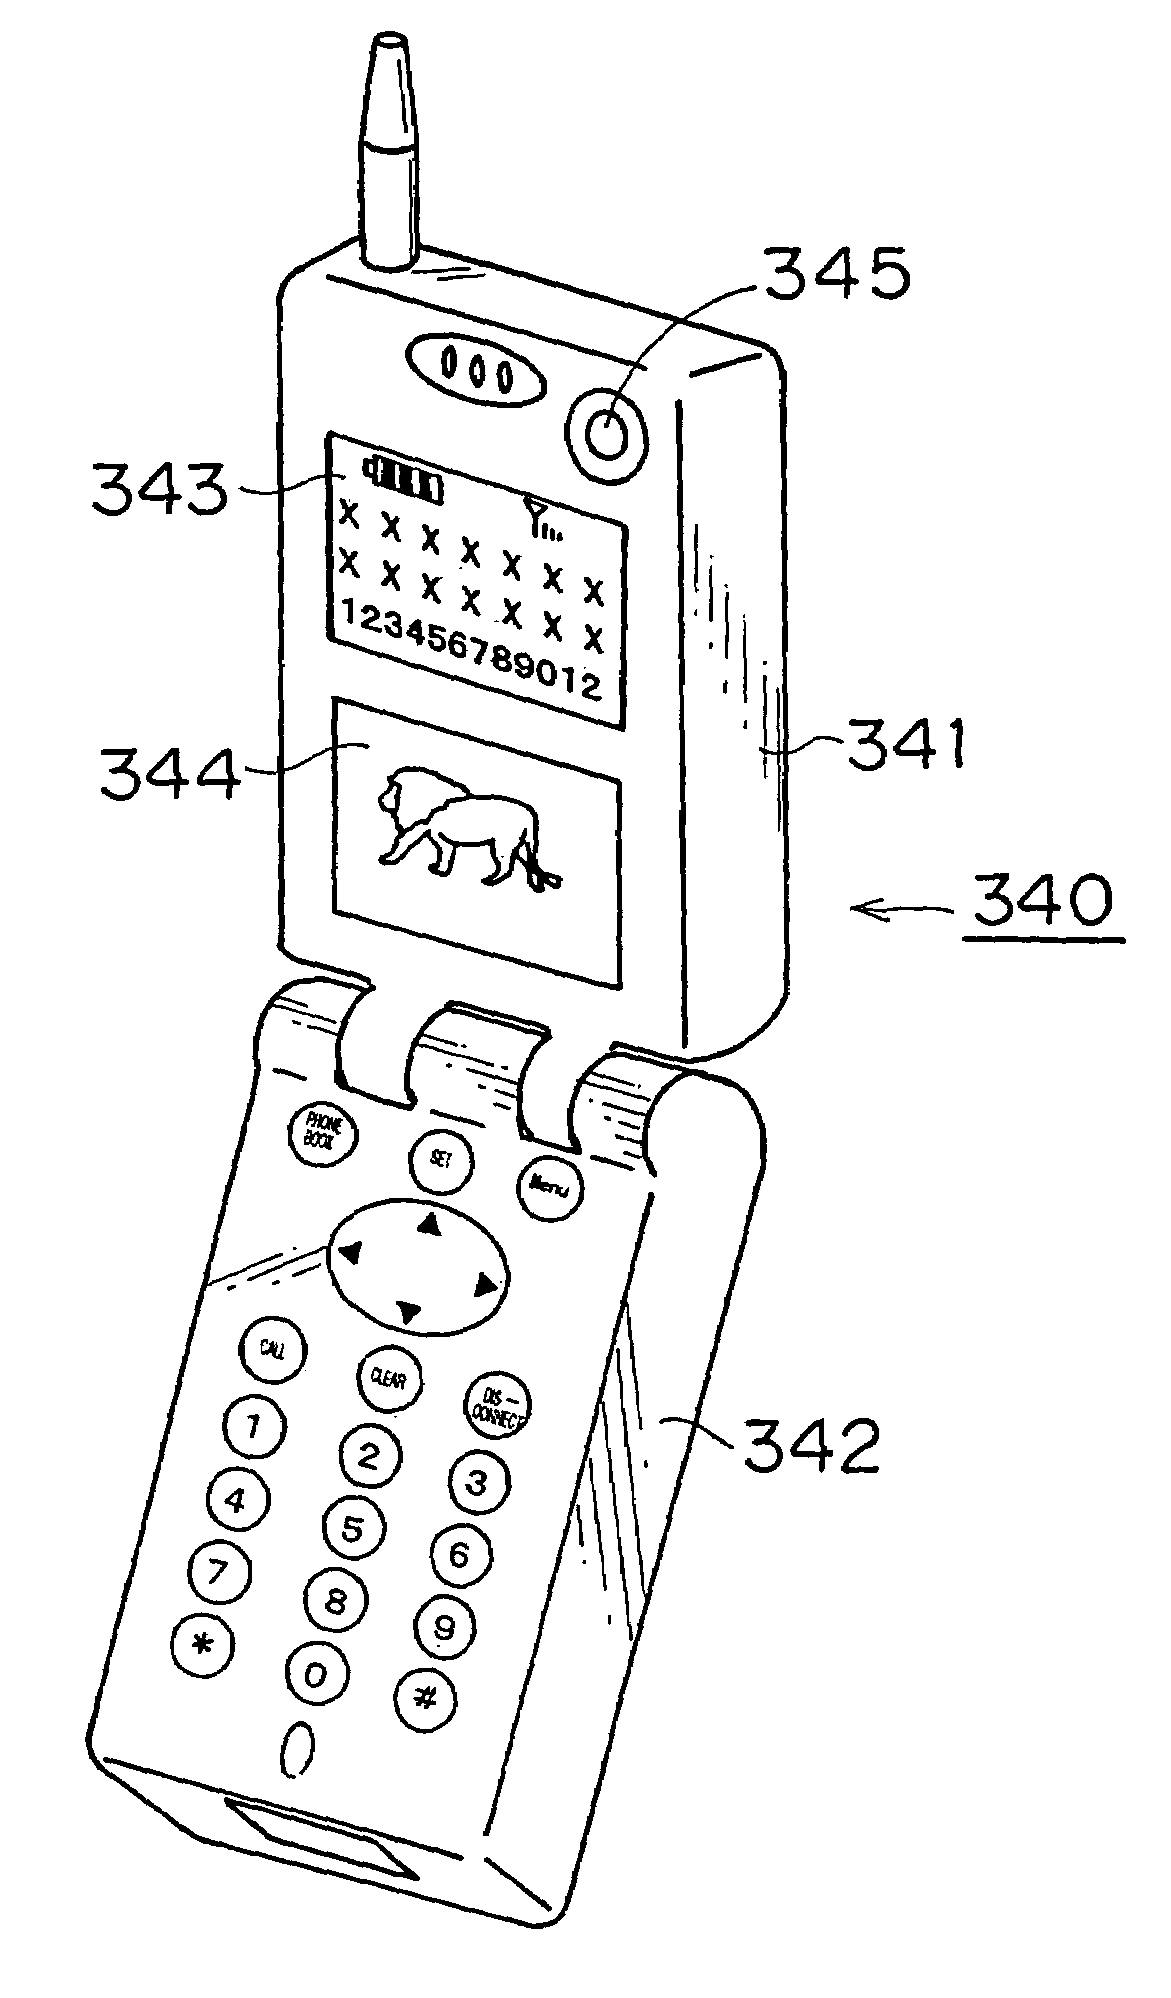 Portable communication terminal with multiple displays